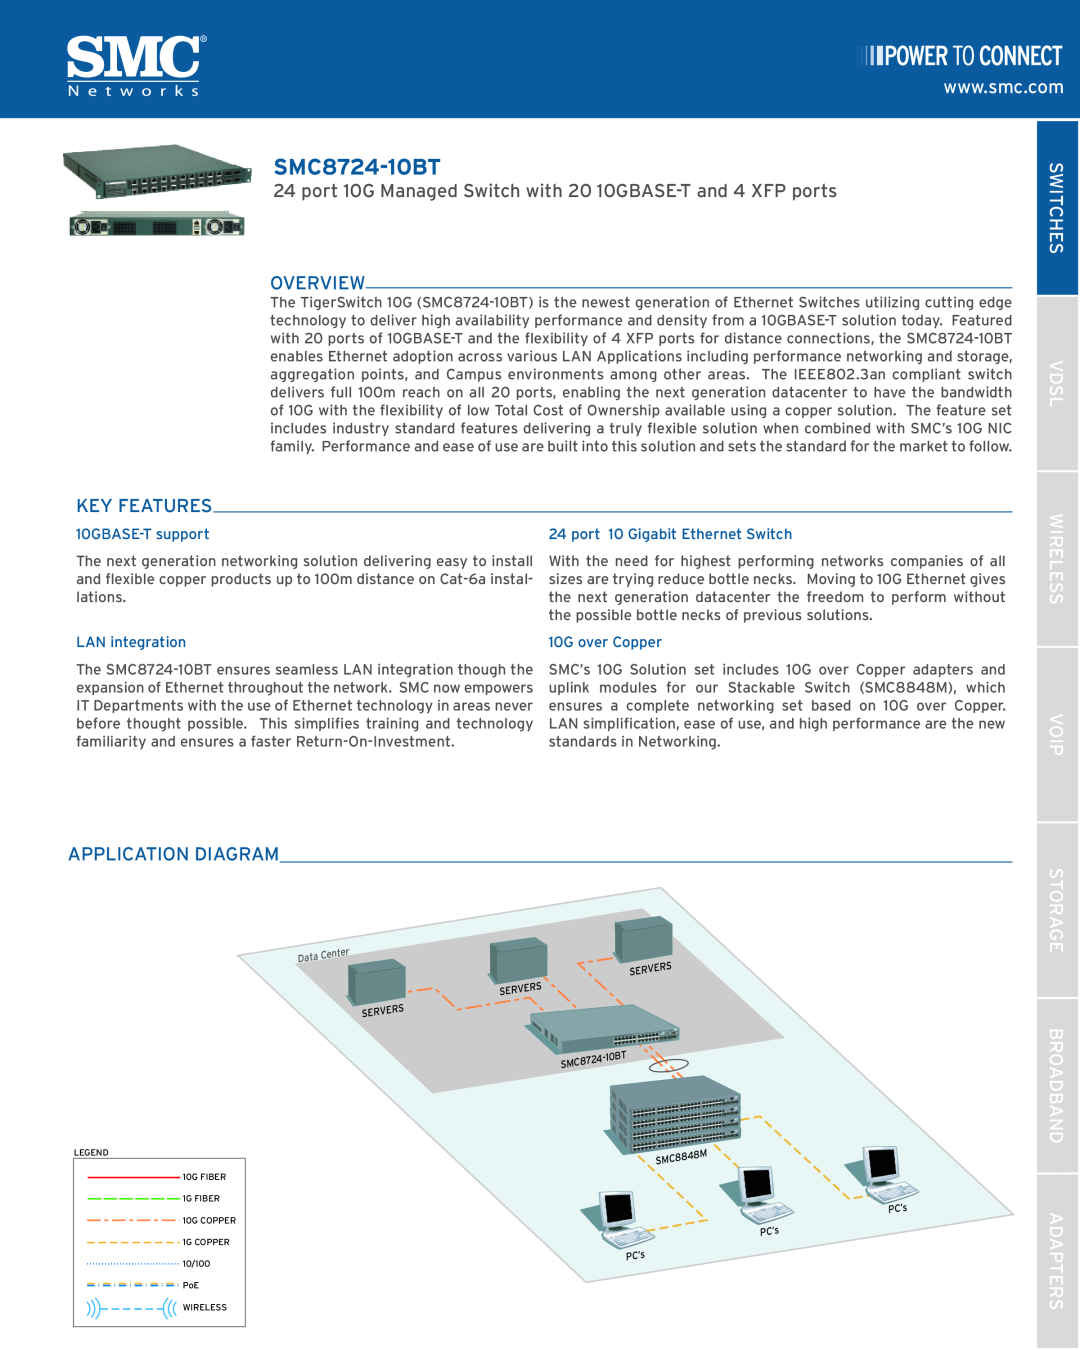 SMC Networks SMC8724-10BT manual Overview, Key Features, Application Diagram, Switches Vdsl Wireless Voip, LAN integration 